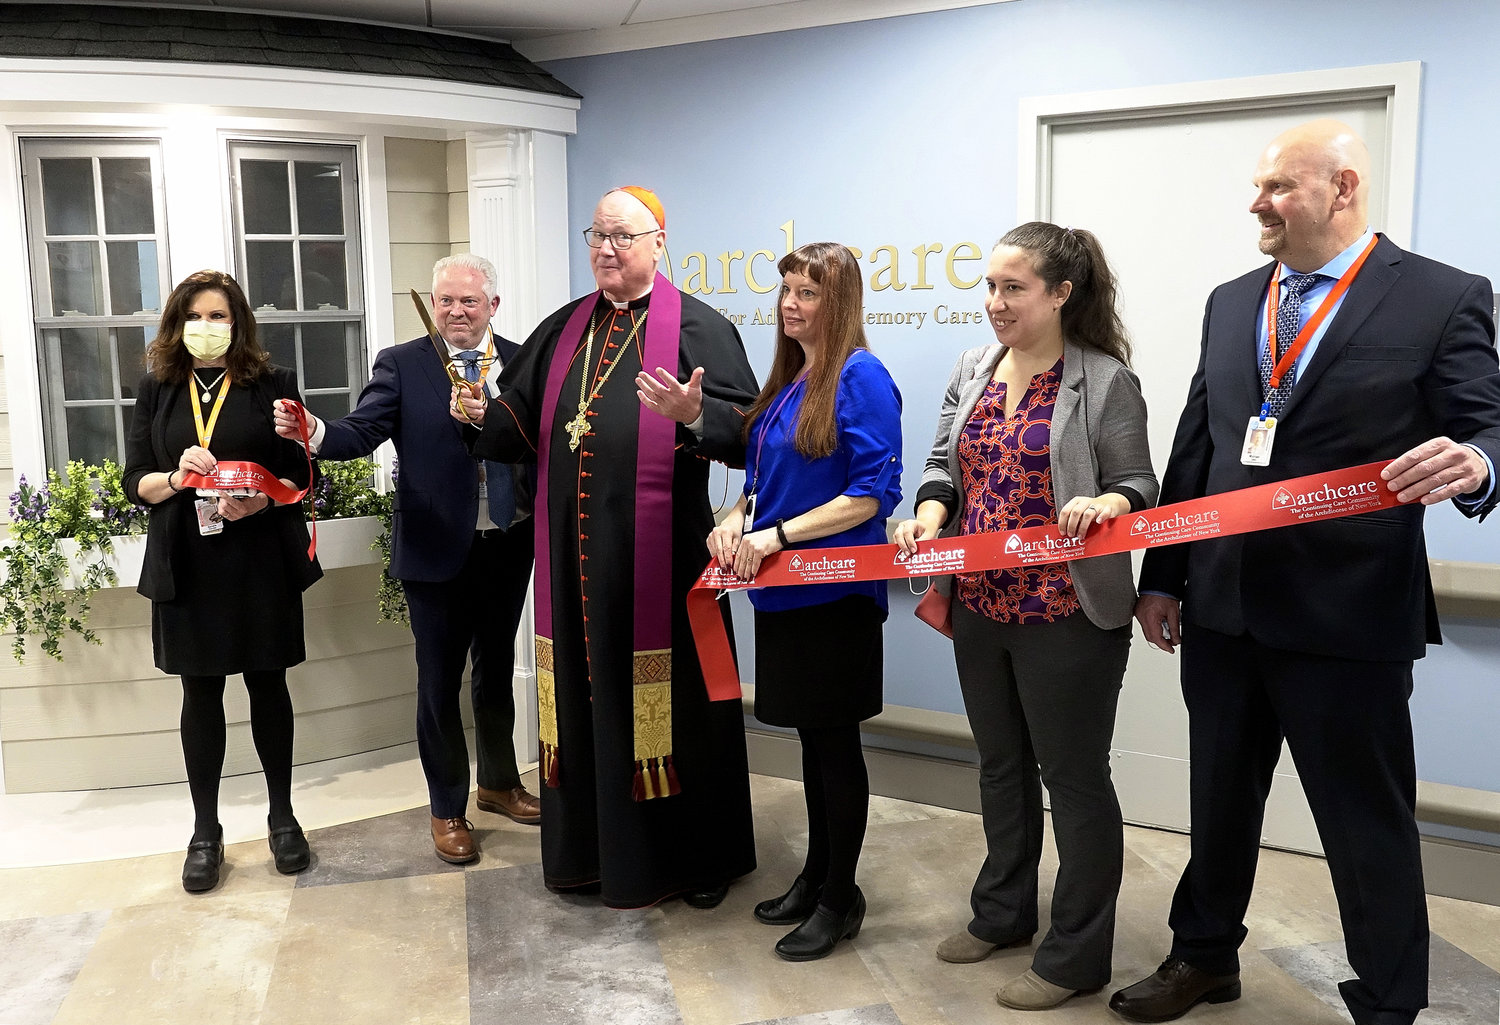 Cardinal Dolan cuts ribbon after blessing the Center for Advanced Memory Care at ArchCare at Ferncliff Nursing Home and Rehabilitation Center in Rhinebeck March 30. Participating in the ceremony, from left, are Sandy Perrotta, chief clinical officer of ArchCare at Ferncliff; Scott LaRue, president and CEO of ArchCare; Cardinal Dolan; Michelle Feller, program director of Center for Advanced Memory Care; Maria Scigliano, program and grants officer at Mother Cabrini Health Foundation; and Michael Deyo, executive director of ArchCare at Ferncliff.